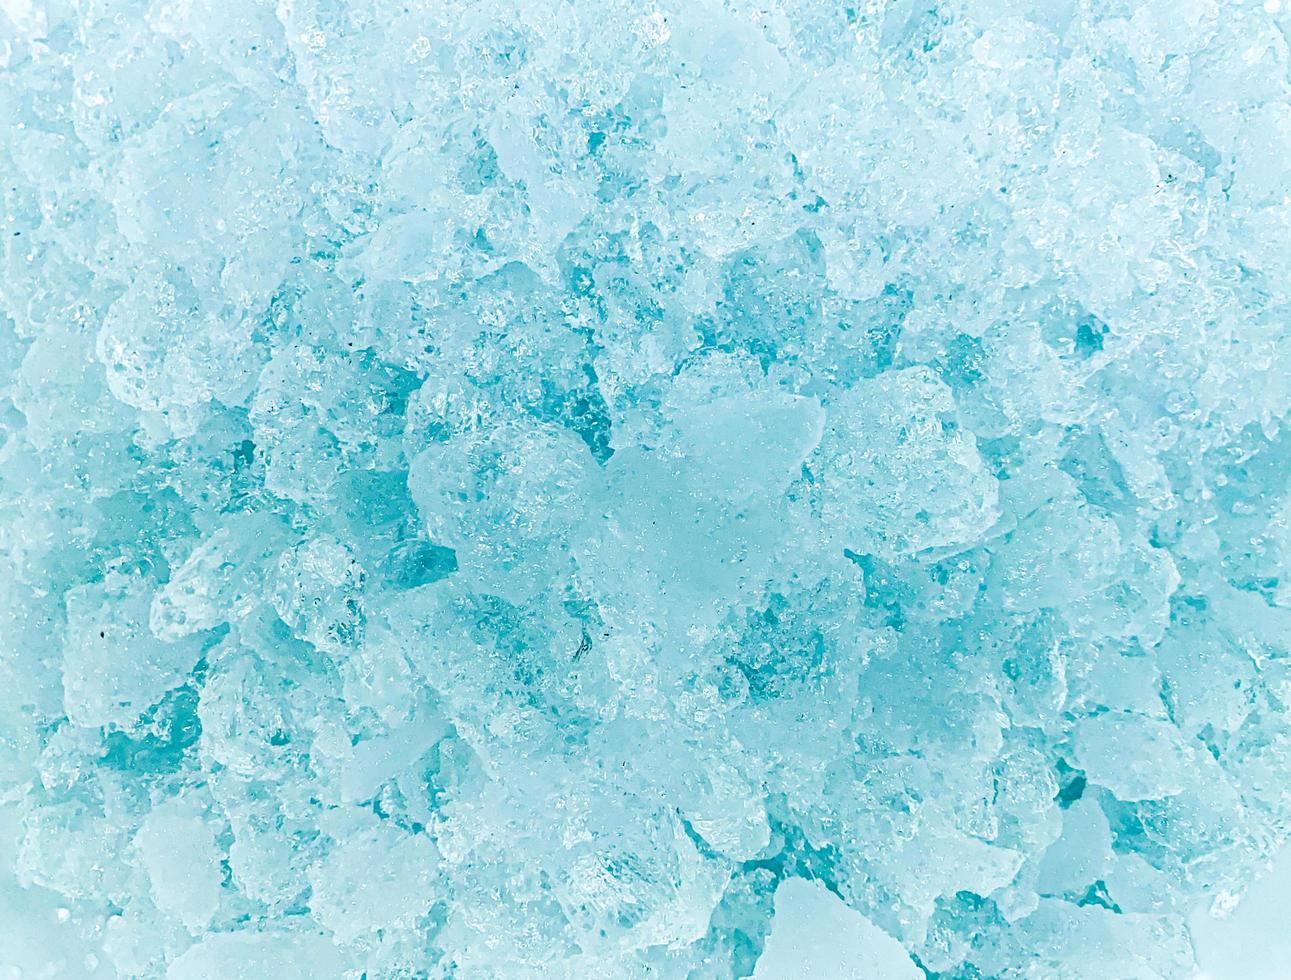 Abstract Ice background, Ice cubes feel fresh on hot days, Ice is indispensable in summer. It will help refresh and make you feel good. photo